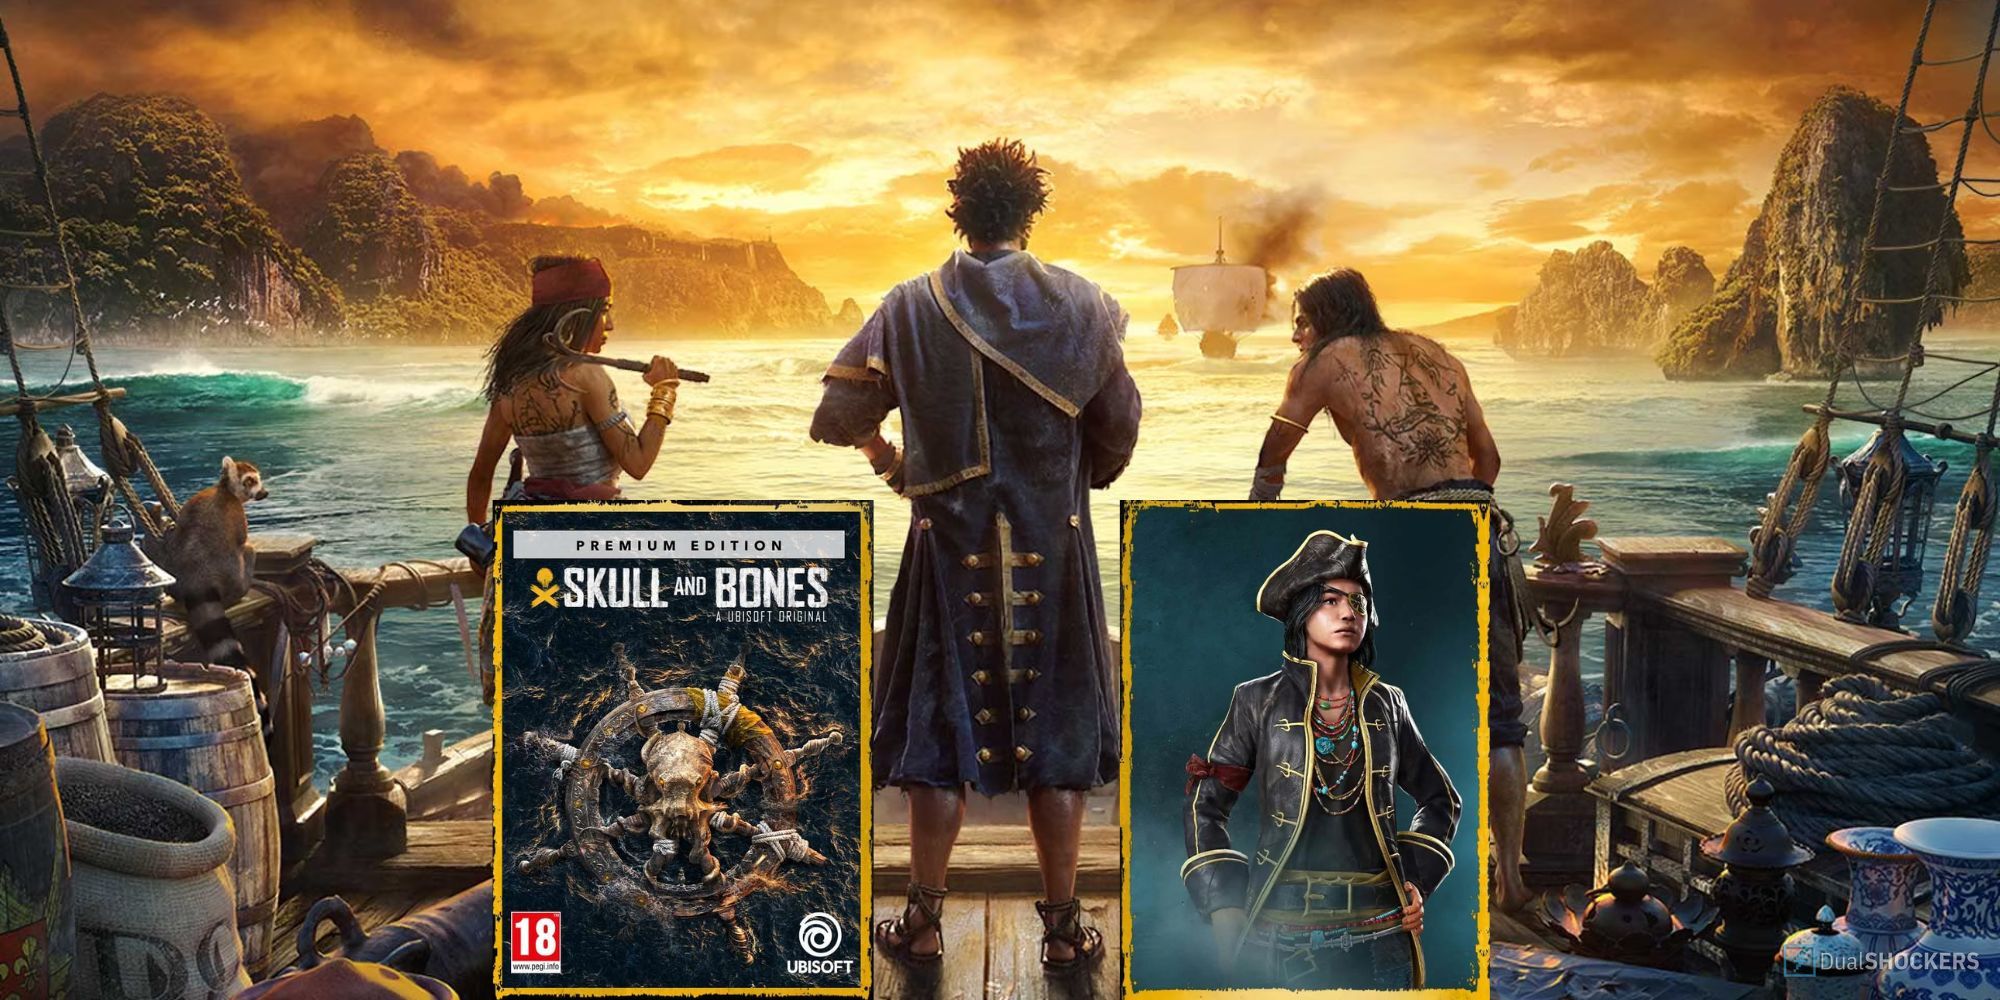 Skull and Bones pre-order guide feature image showing three pirates looking out at sea the with cover and pre-order bonus beside.